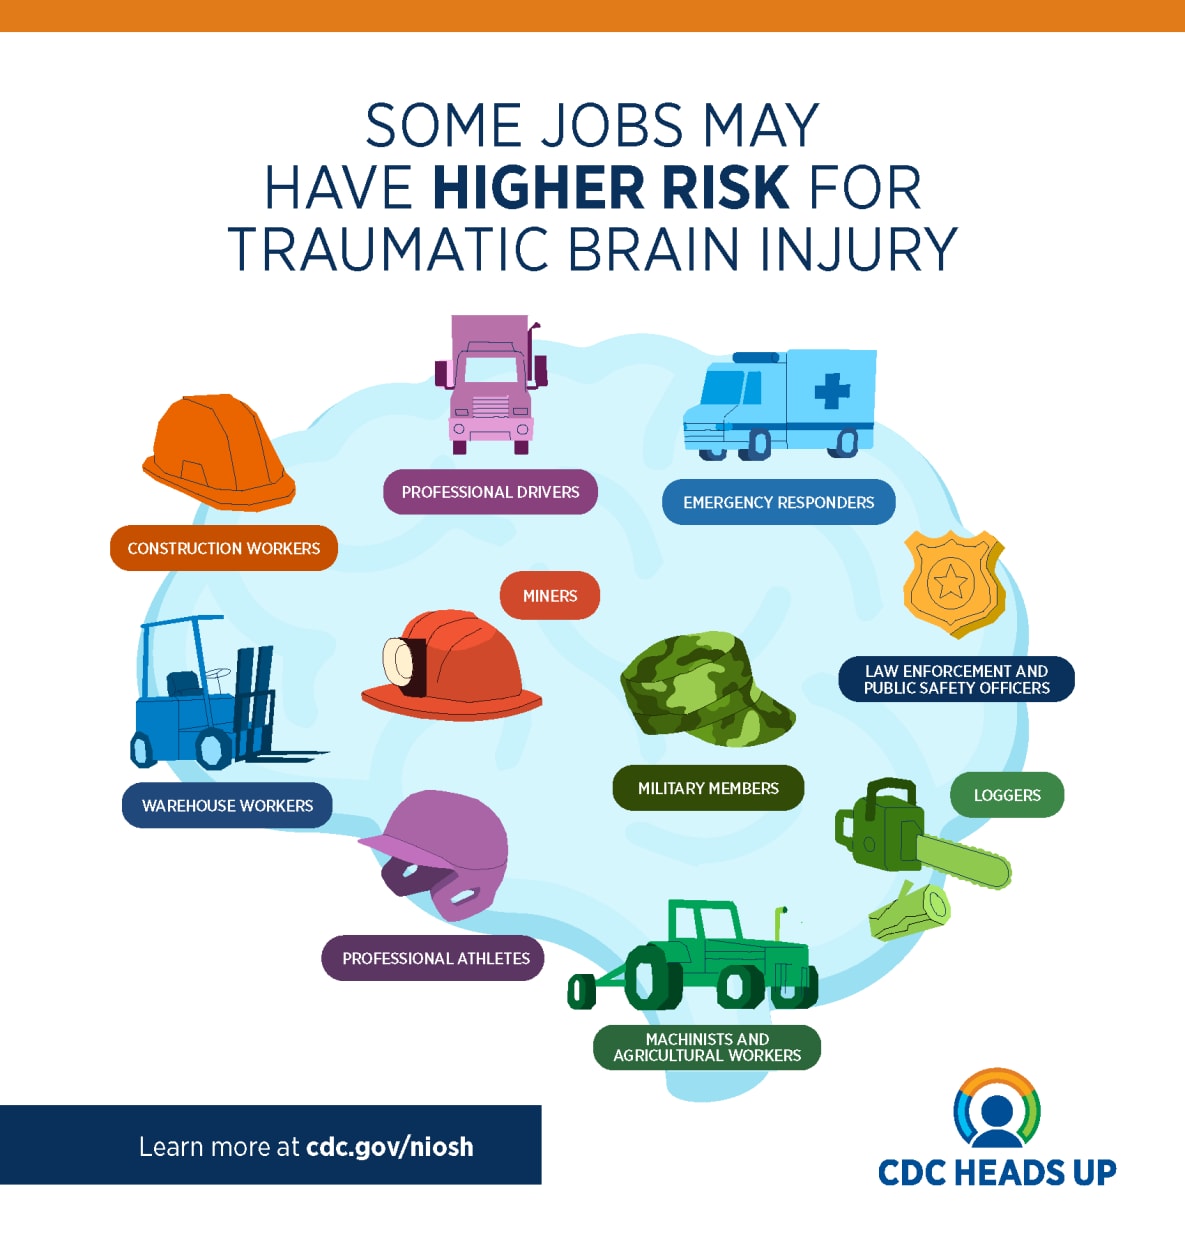 Some jobs may have higher risk for Traumatic Brain Injury, including construction workers, professional drivers, emergency responders, minders, warehouse workers, prof athletes, loggers, law enforcement officers, machinists, and agricultural workers.